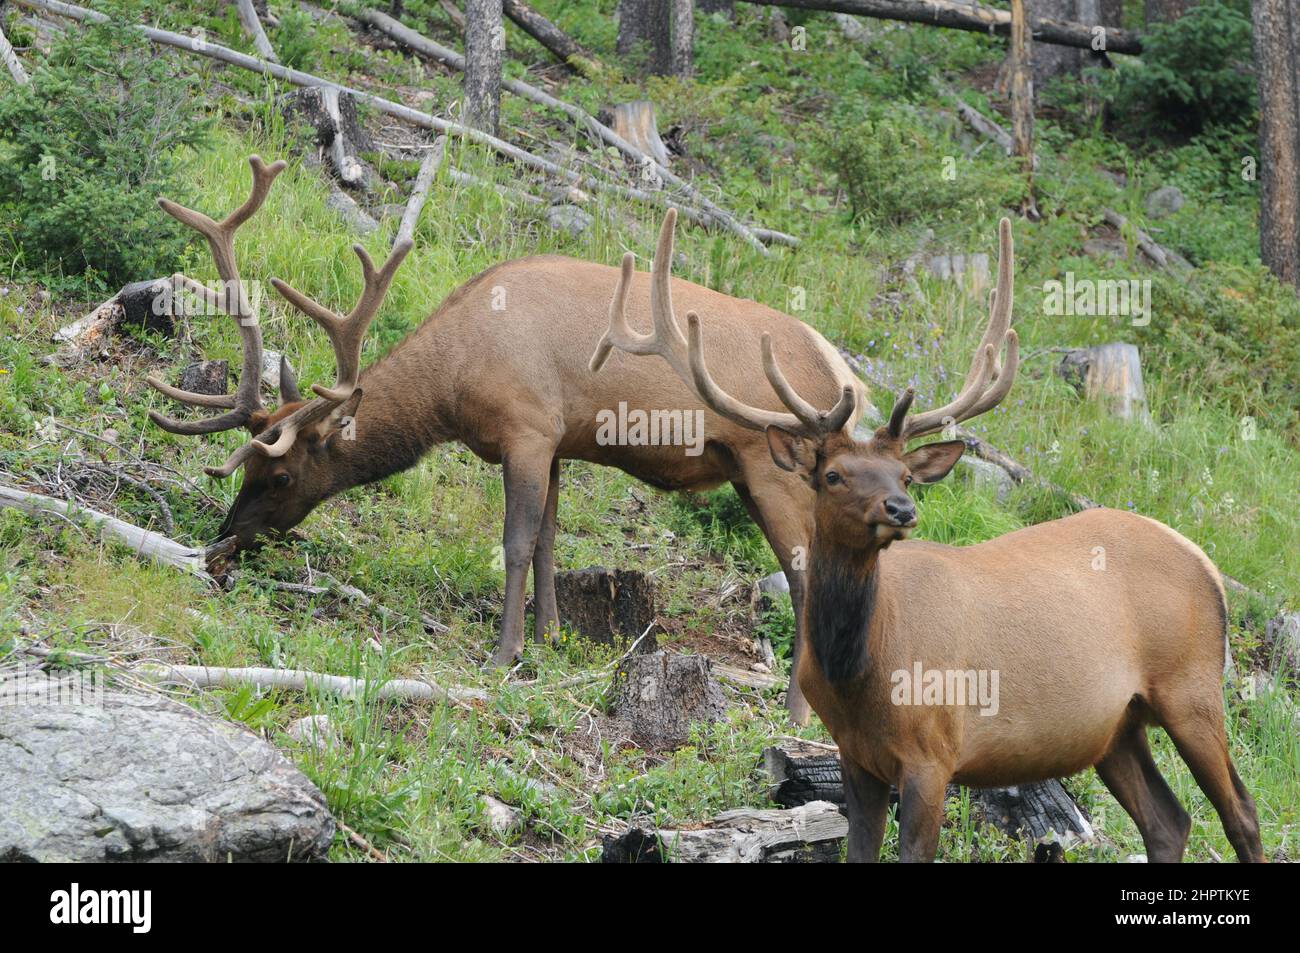 Elk in the wild grazing on forest-edge green grasses, plants, leaves, and bark in the mountains of the Western United States. Stock Photo